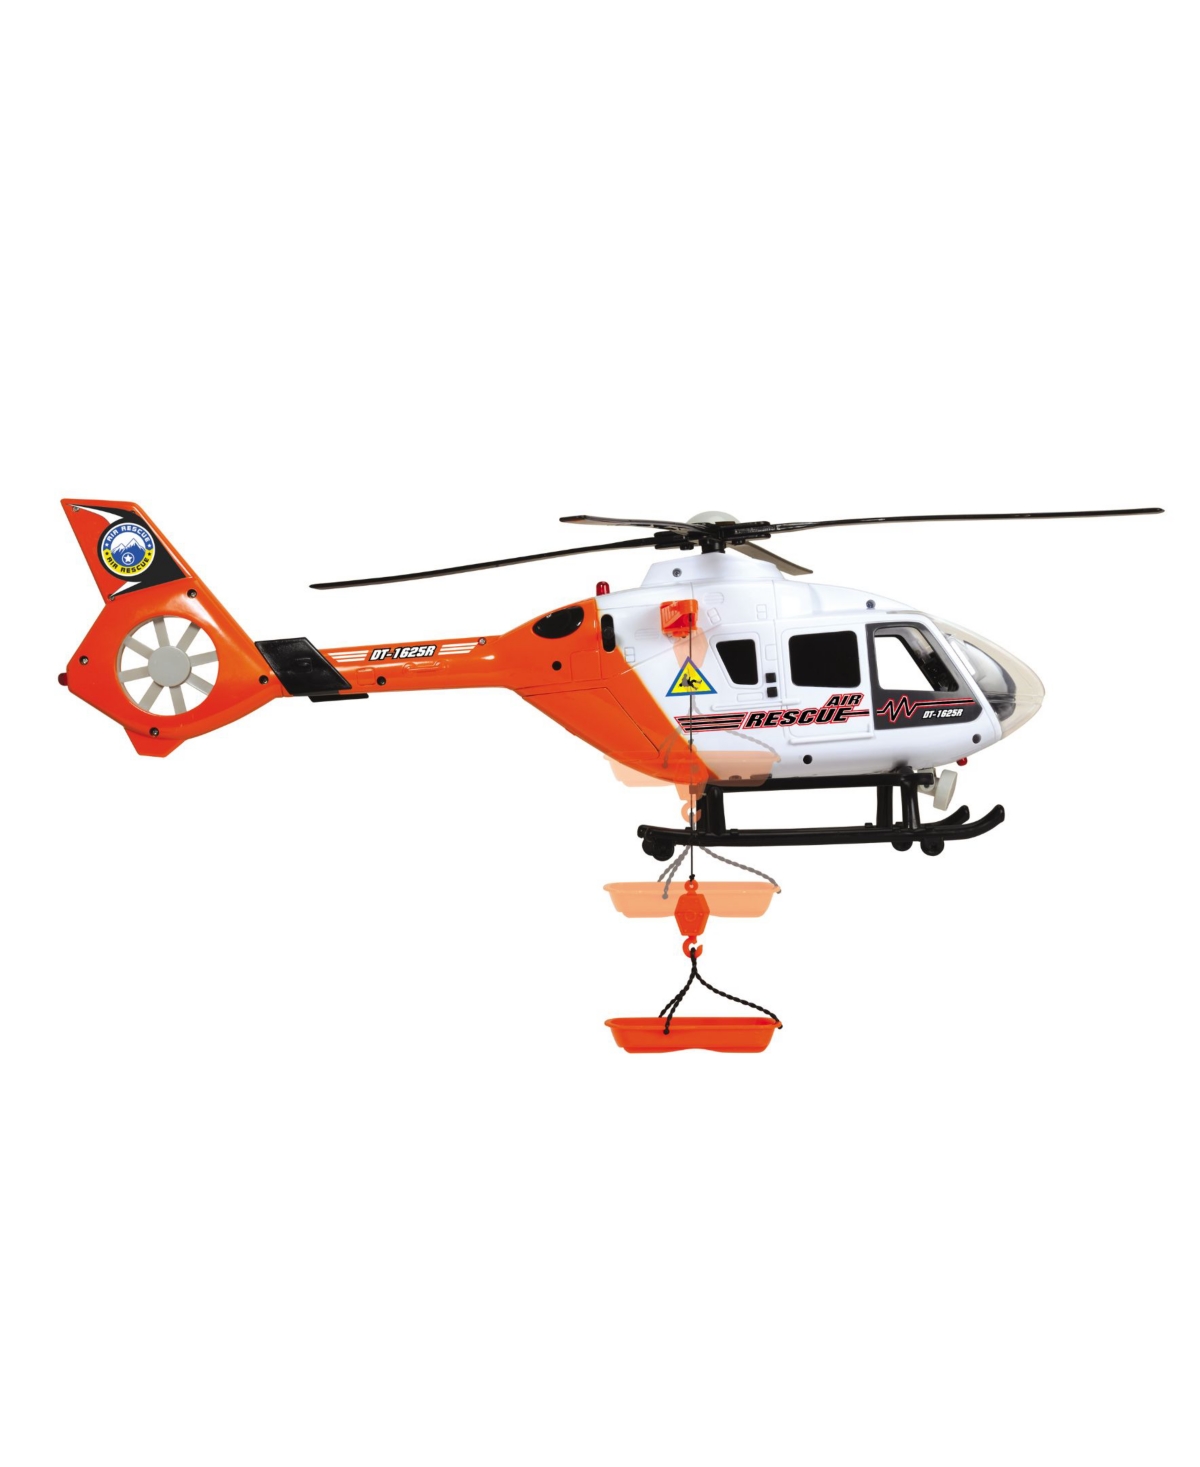 Shop Dickie Toys Hk Ltd - 25" Light And Sound Sos Rescue Helicopter With Moving Rotor Blades In Multi